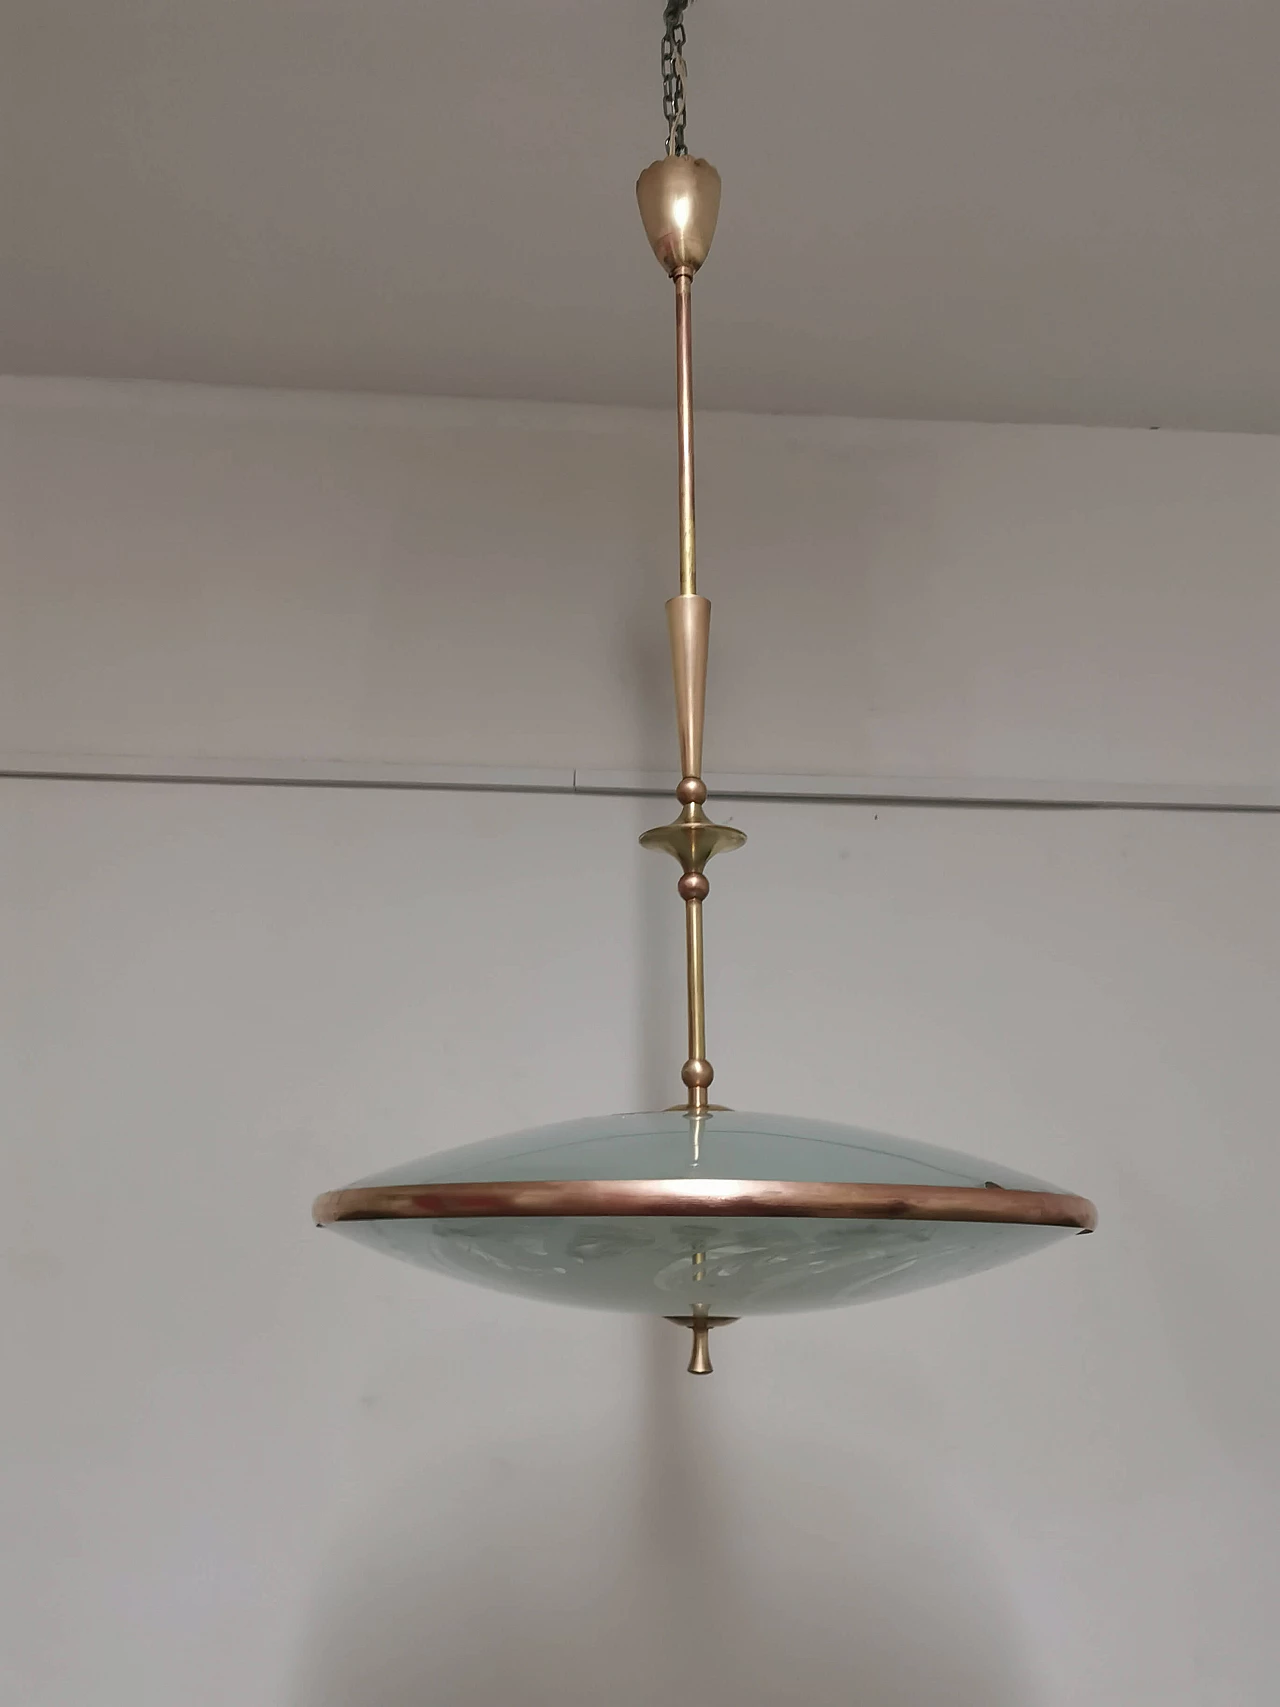 Suspension lamp by Pietro Chiesa for Fontana Arte, 1940s 1372293